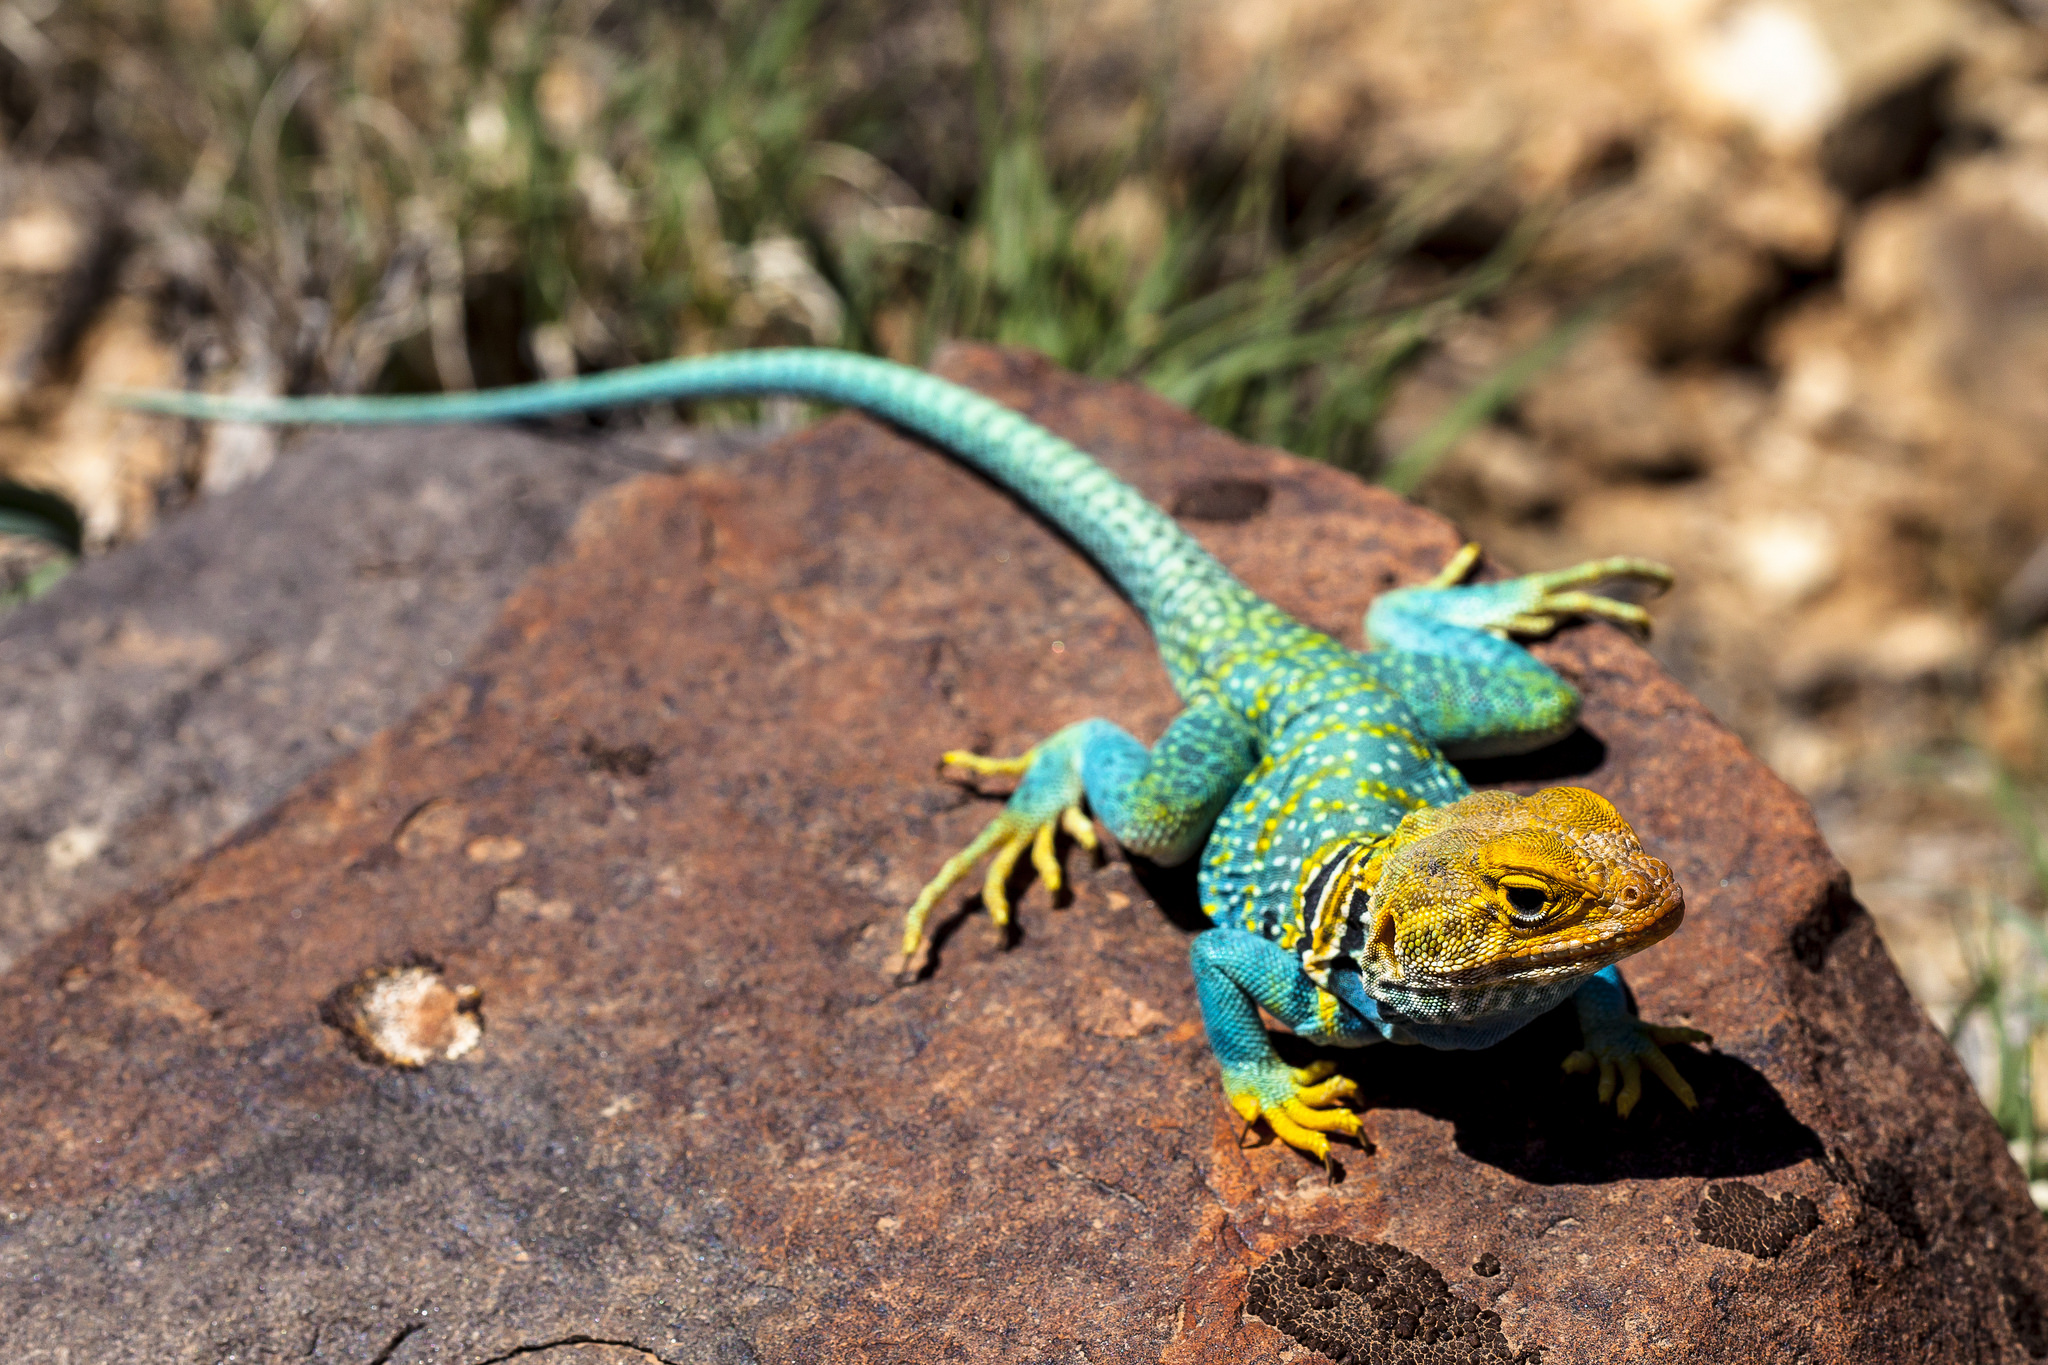 Common collared lizard by Jacob W. Frank